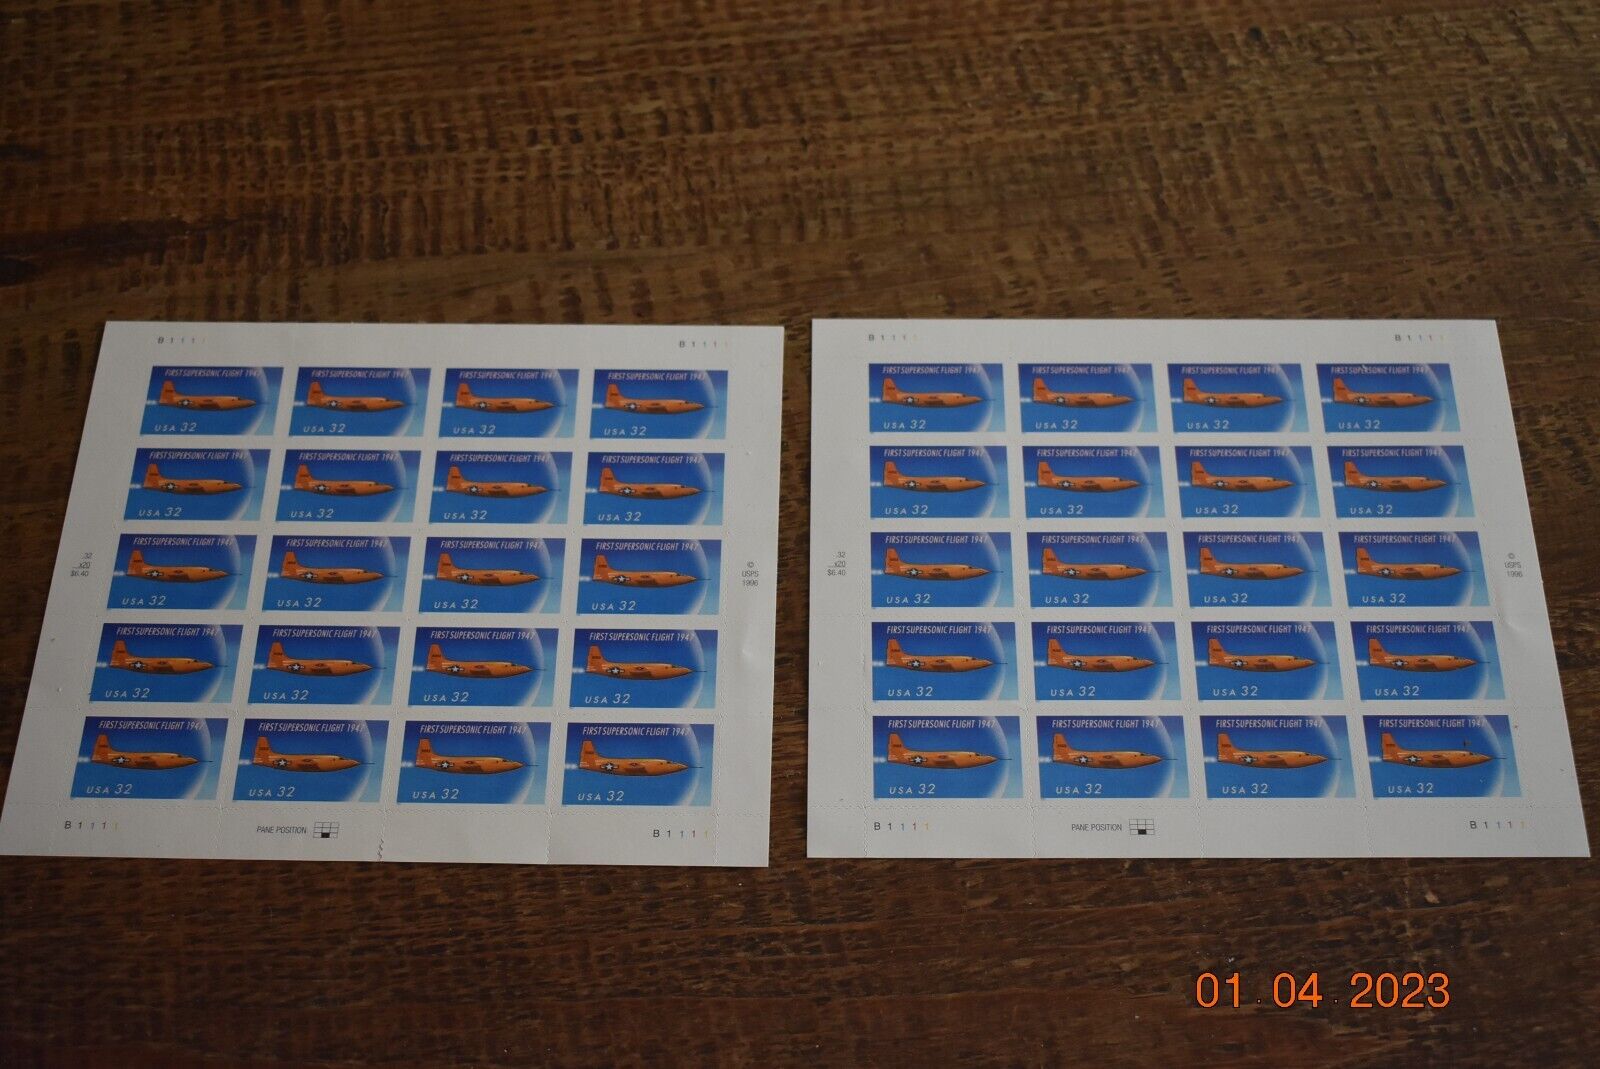 US, First Supersonic Flight, 32 cents, lot of 2 stamp sheets of 20 (40 total)